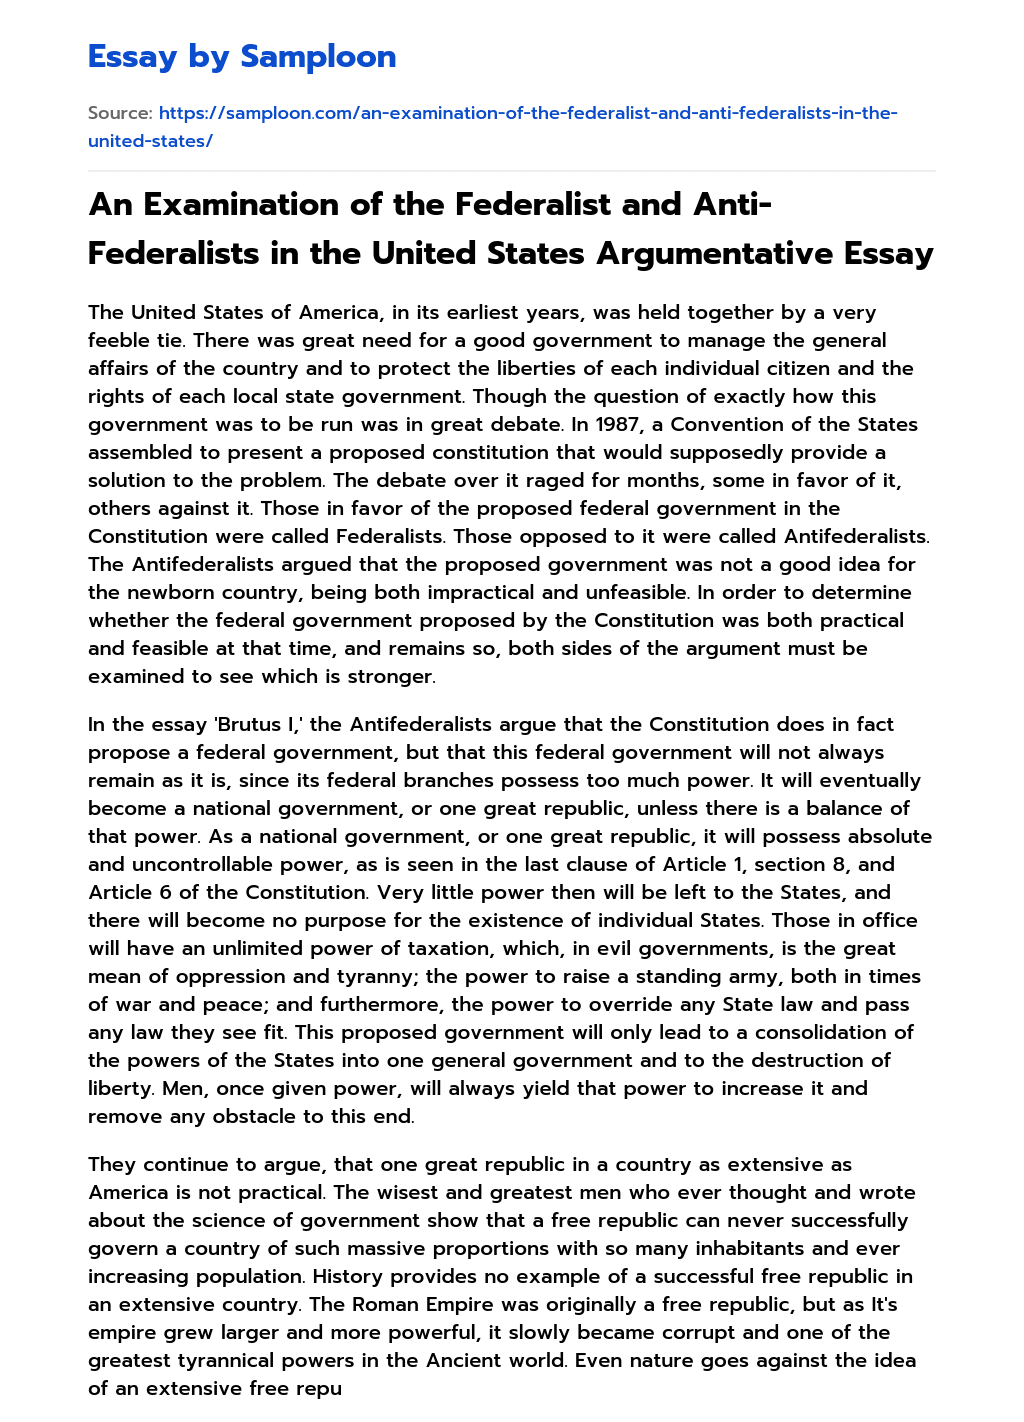 An Examination of the Federalist and Anti-Federalists in the United States Argumentative Essay essay